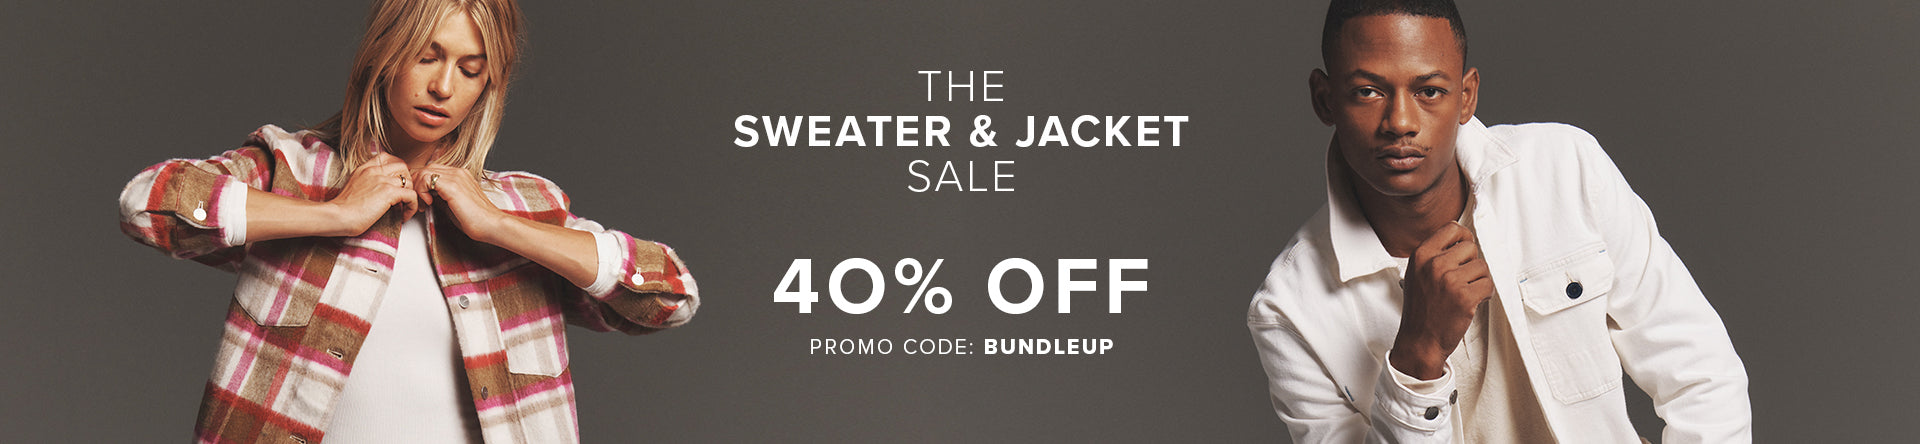 WOMEN / THE SWEATER & JACKET SALE's Collection Banner Image